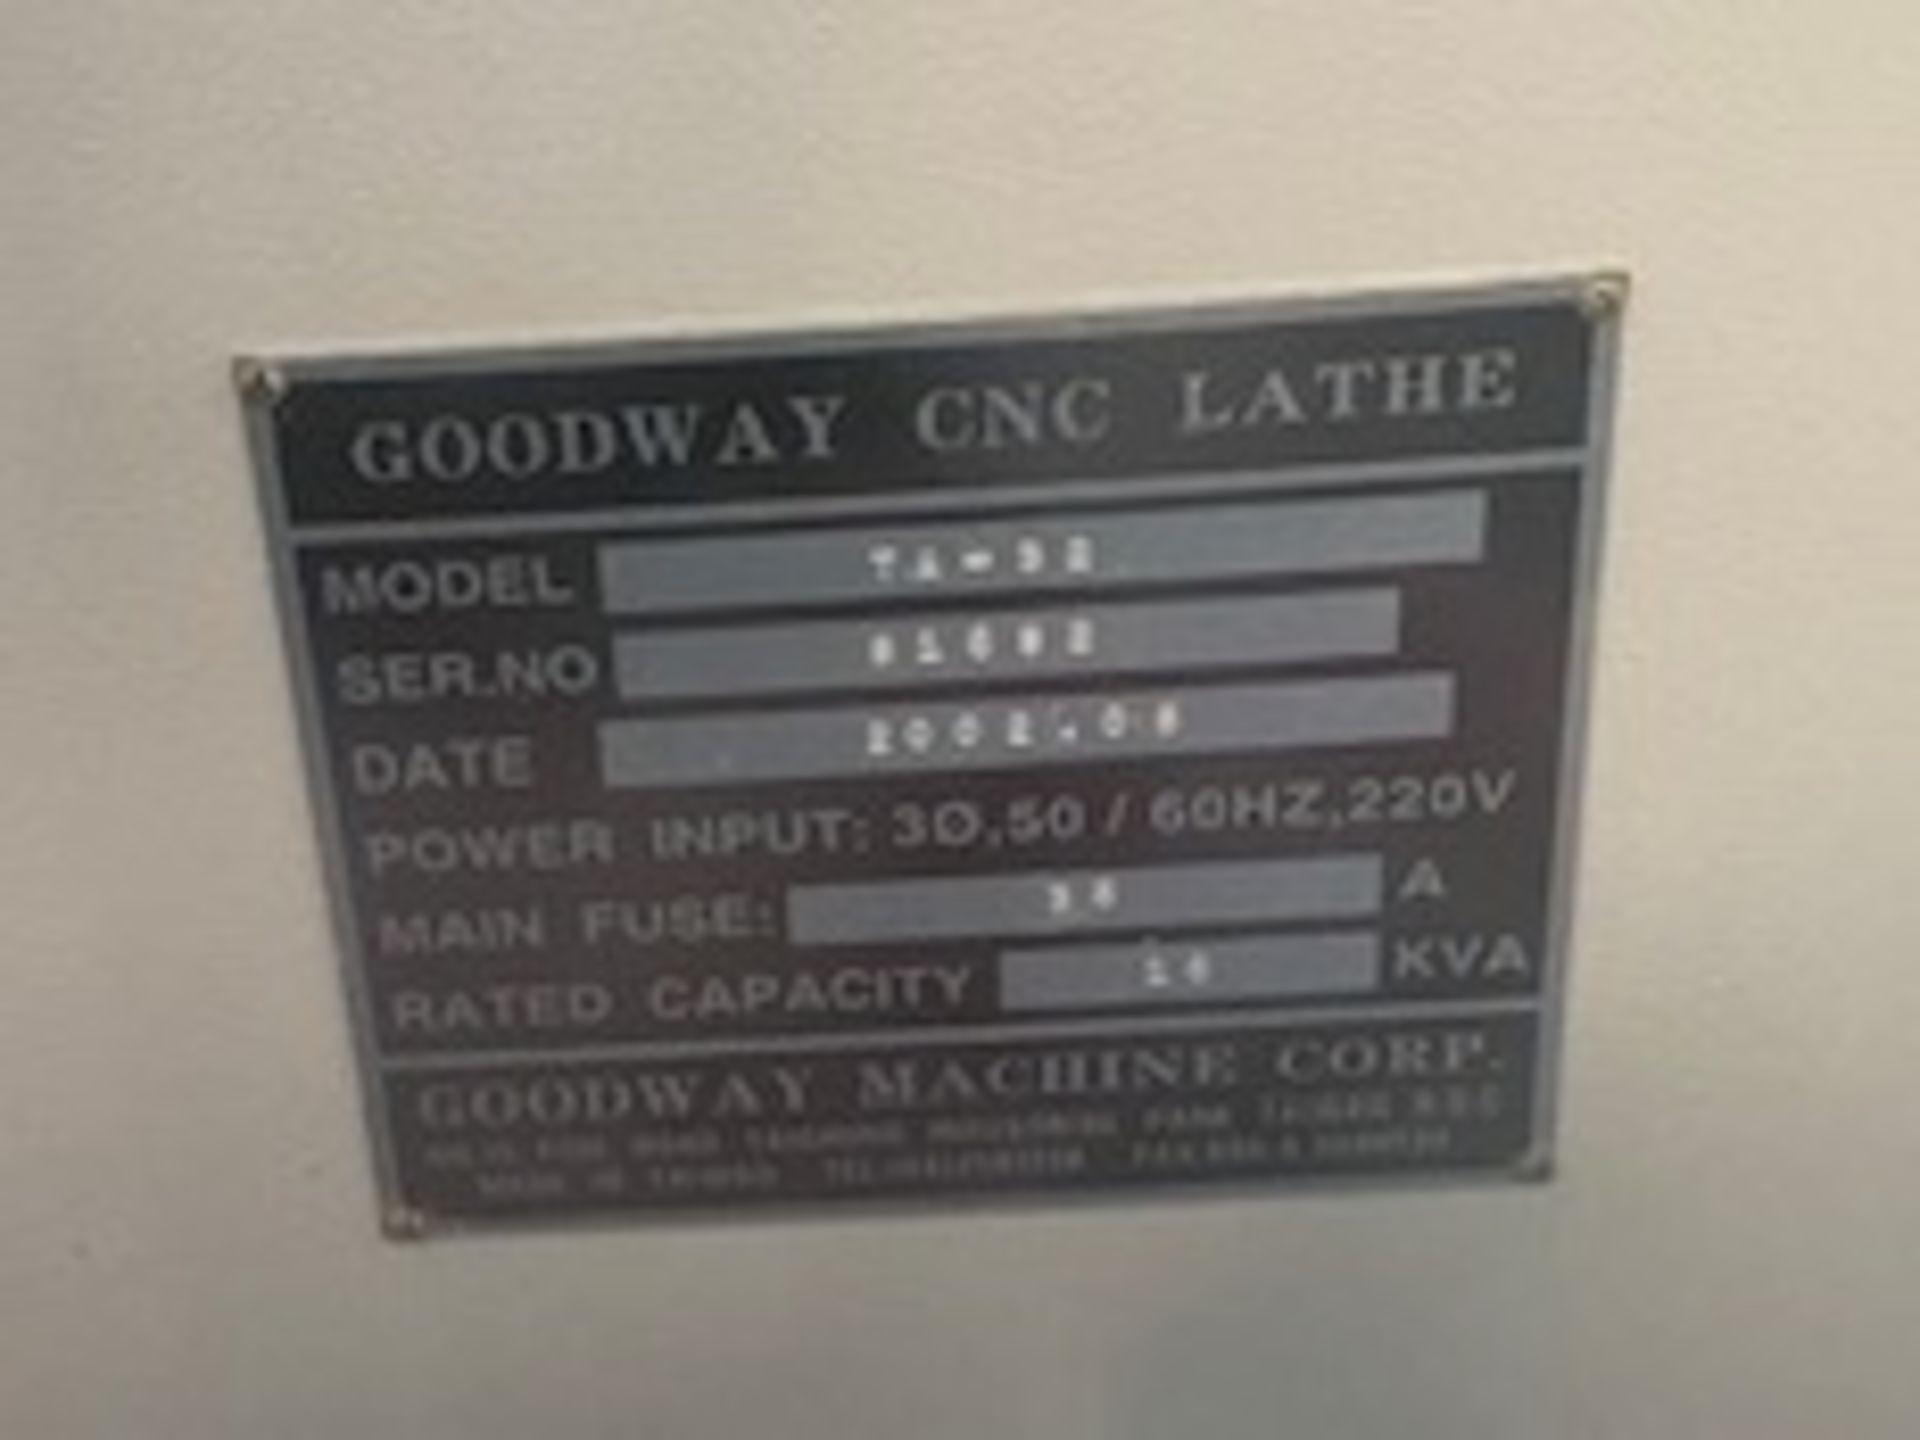 Goodway TA-32 CNC Lathe (2002) Serial Number 81692 with Goodway BF-654 Bar Feed (Location: Earls - Image 8 of 10